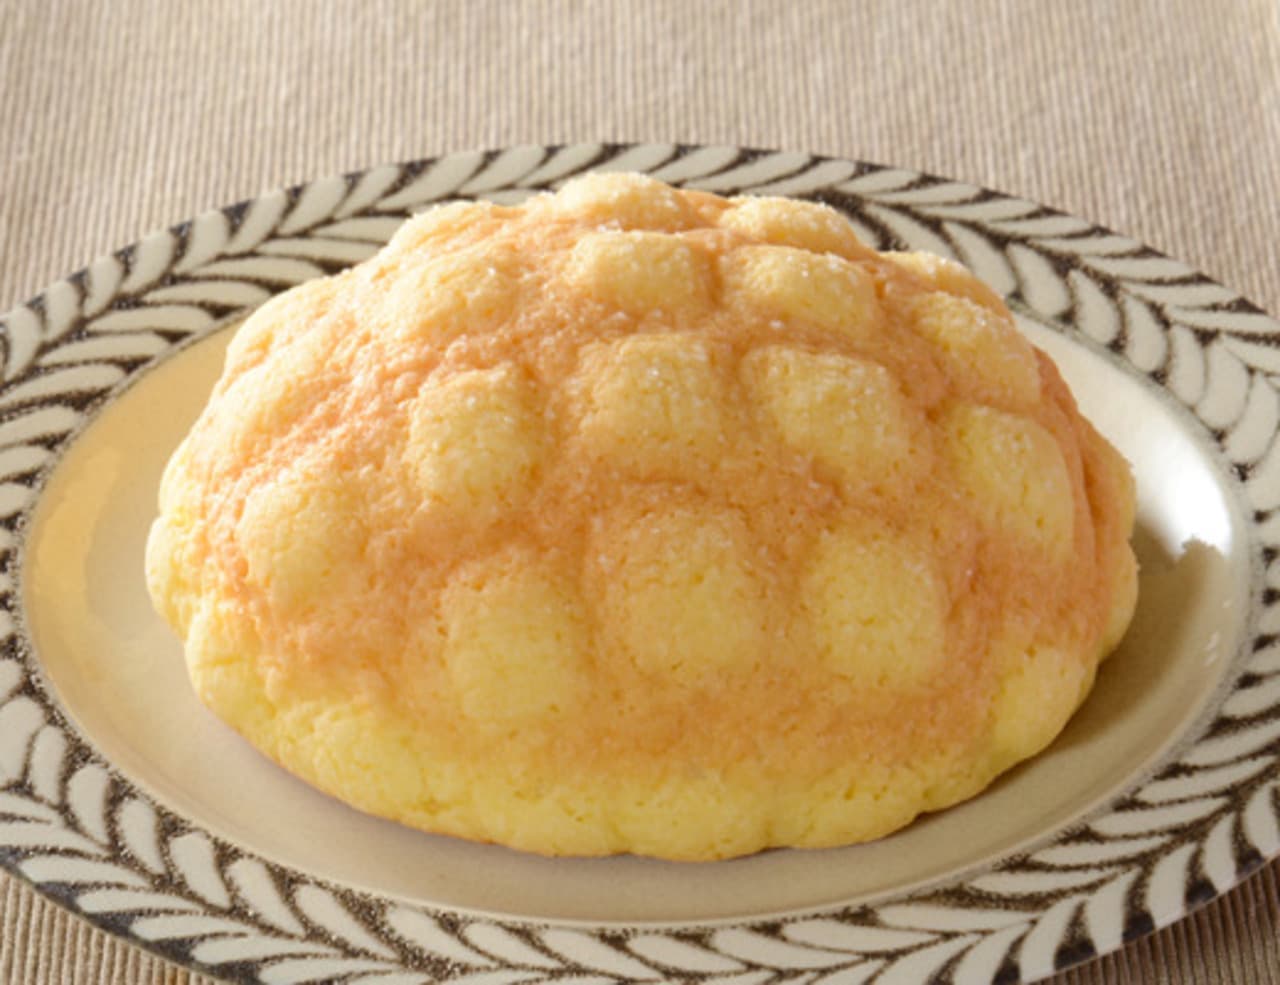 LAWSON "Excellent Melon Pan" (Japanese only)